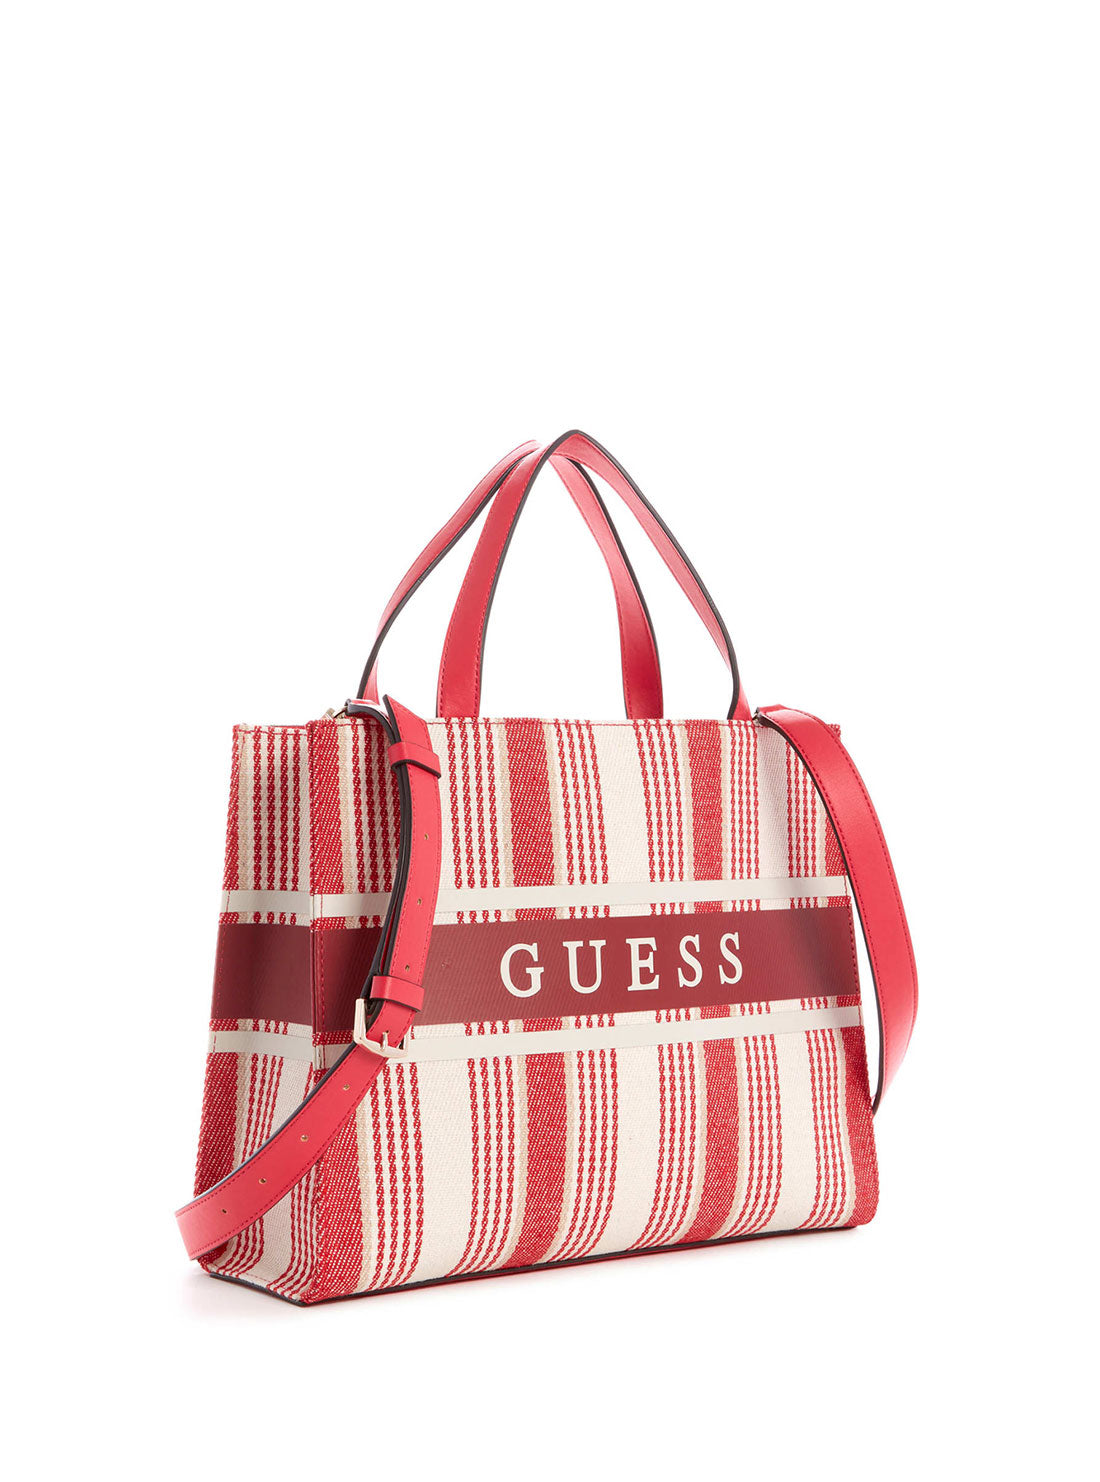 GUESS Red Stripe Monique Small Tote Bag side view